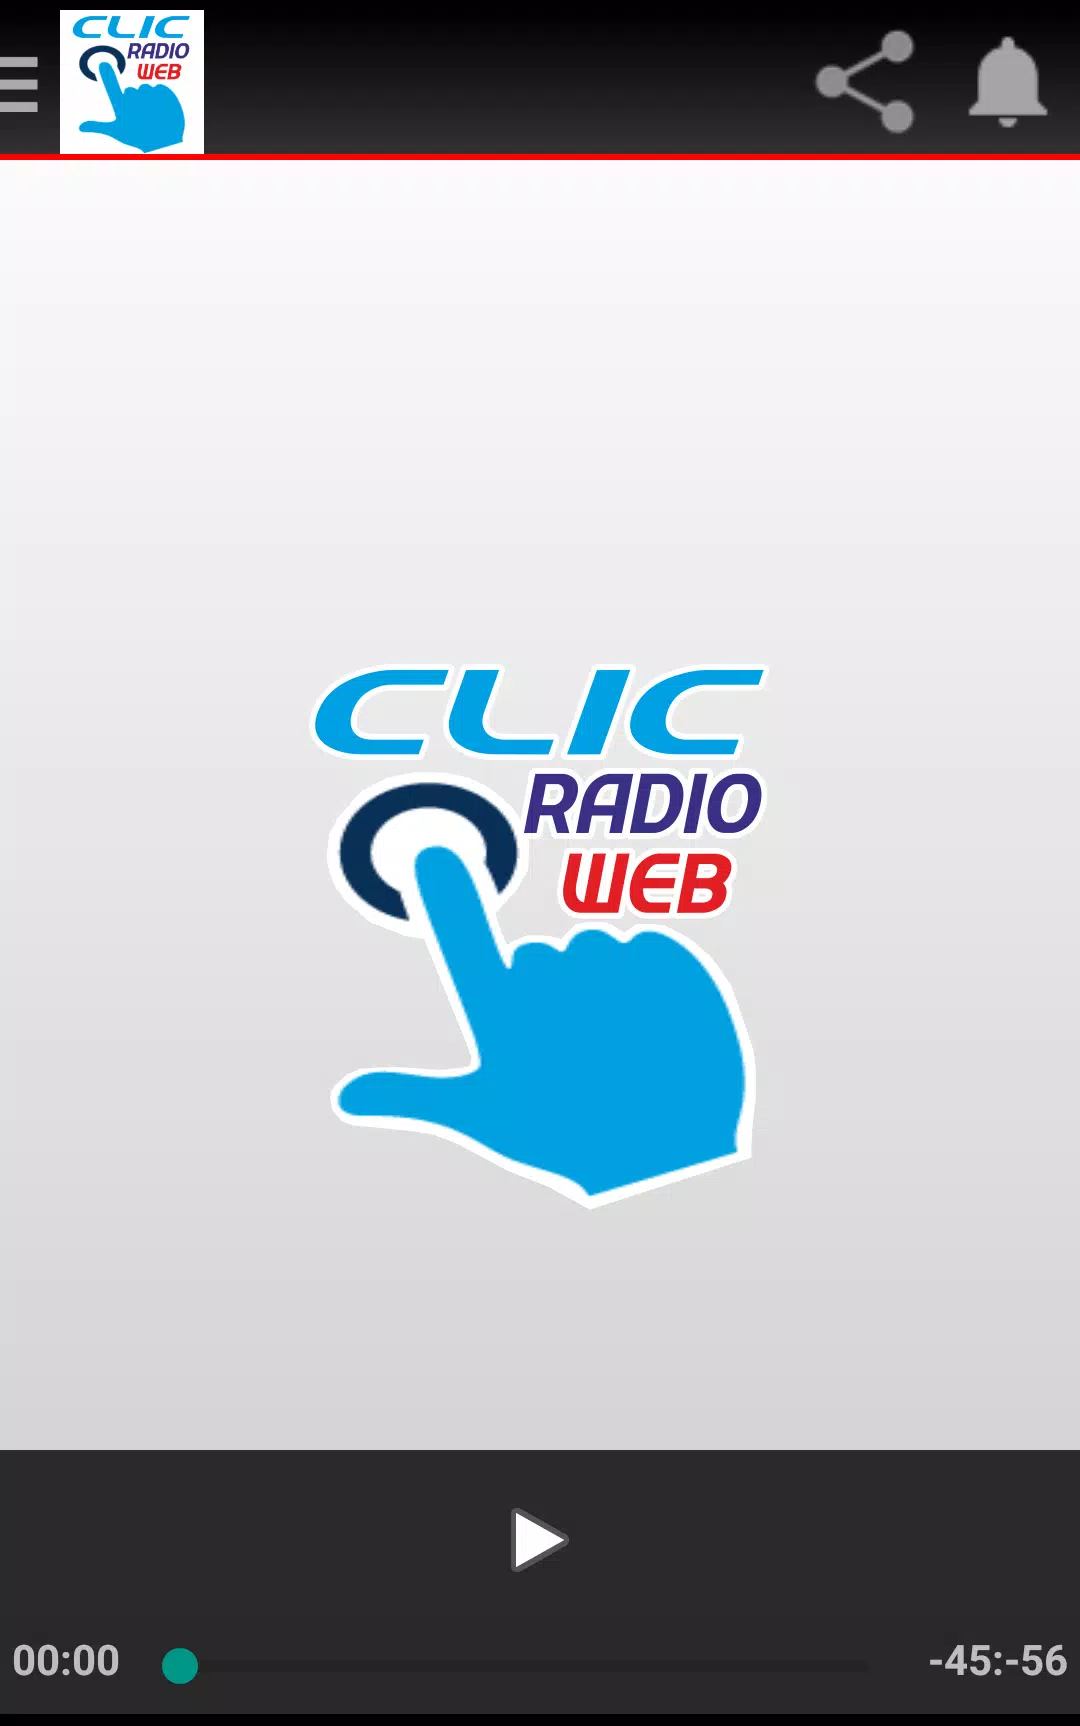 CLIC RADIO WEB for Android - APK Download